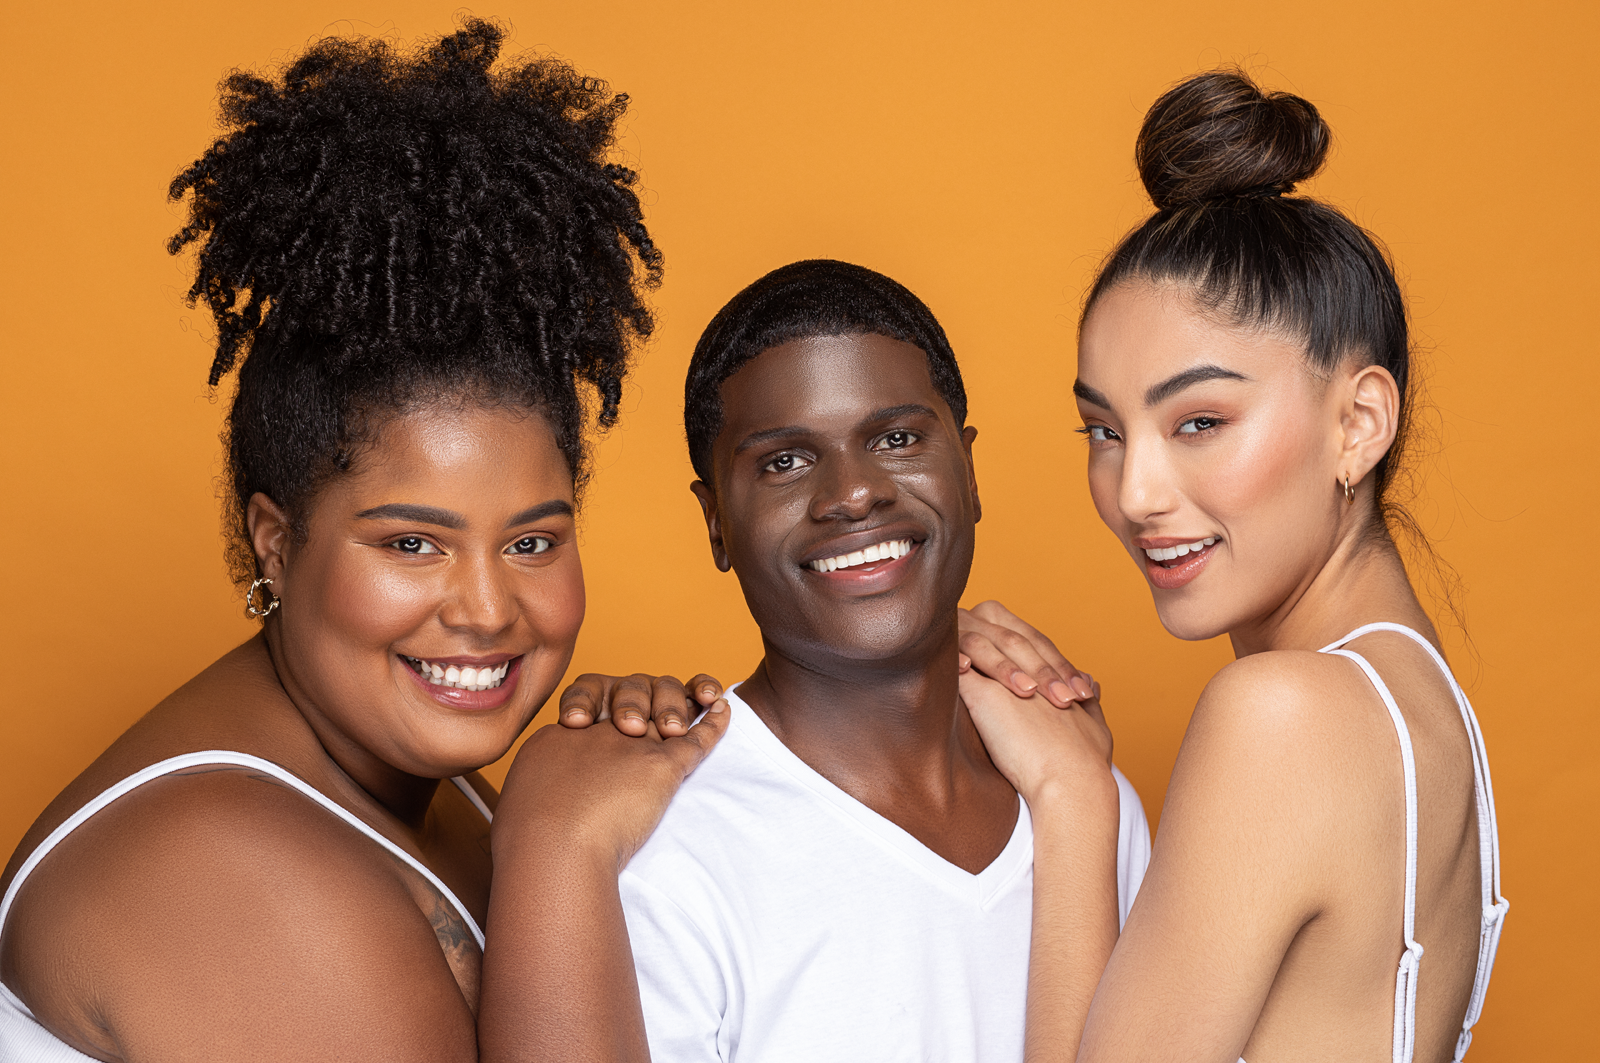 Two female models and one male model in the middle. All three models have different melanin shades. The models represent diversity, which is what ANIN Actives stands for.